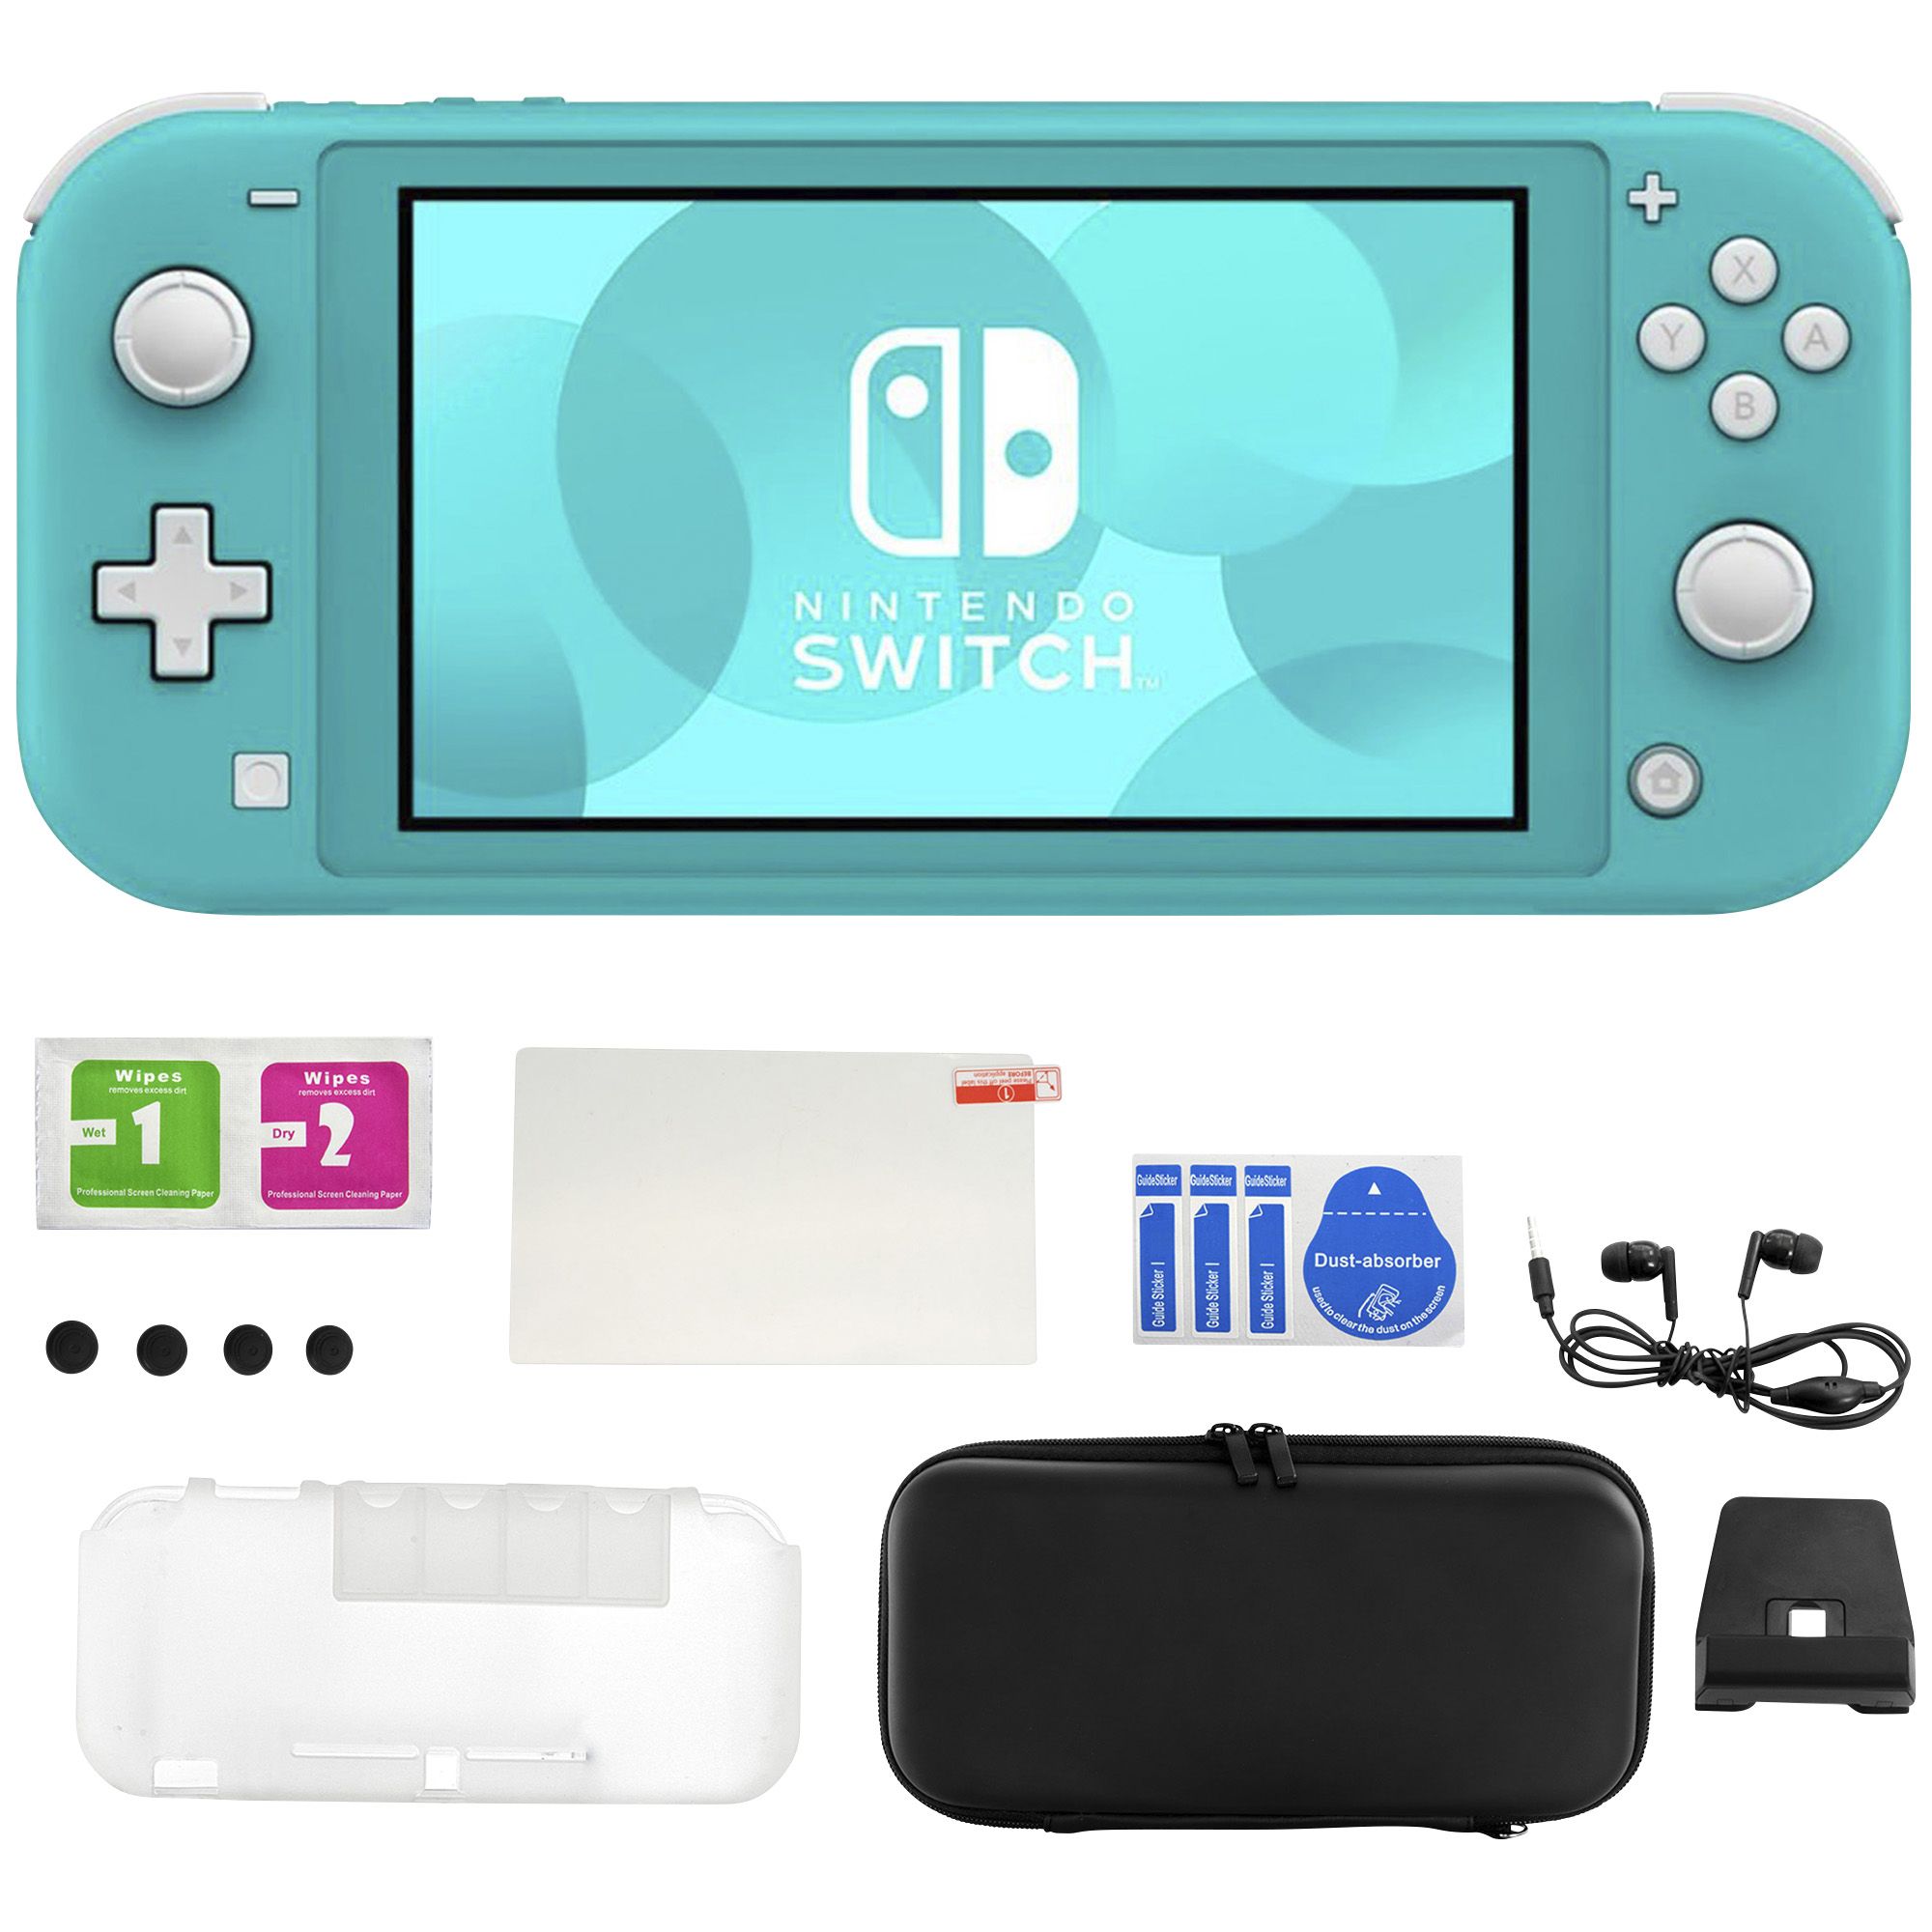 Fingerhut - Nintendo Switch Lite System in Turquoise with